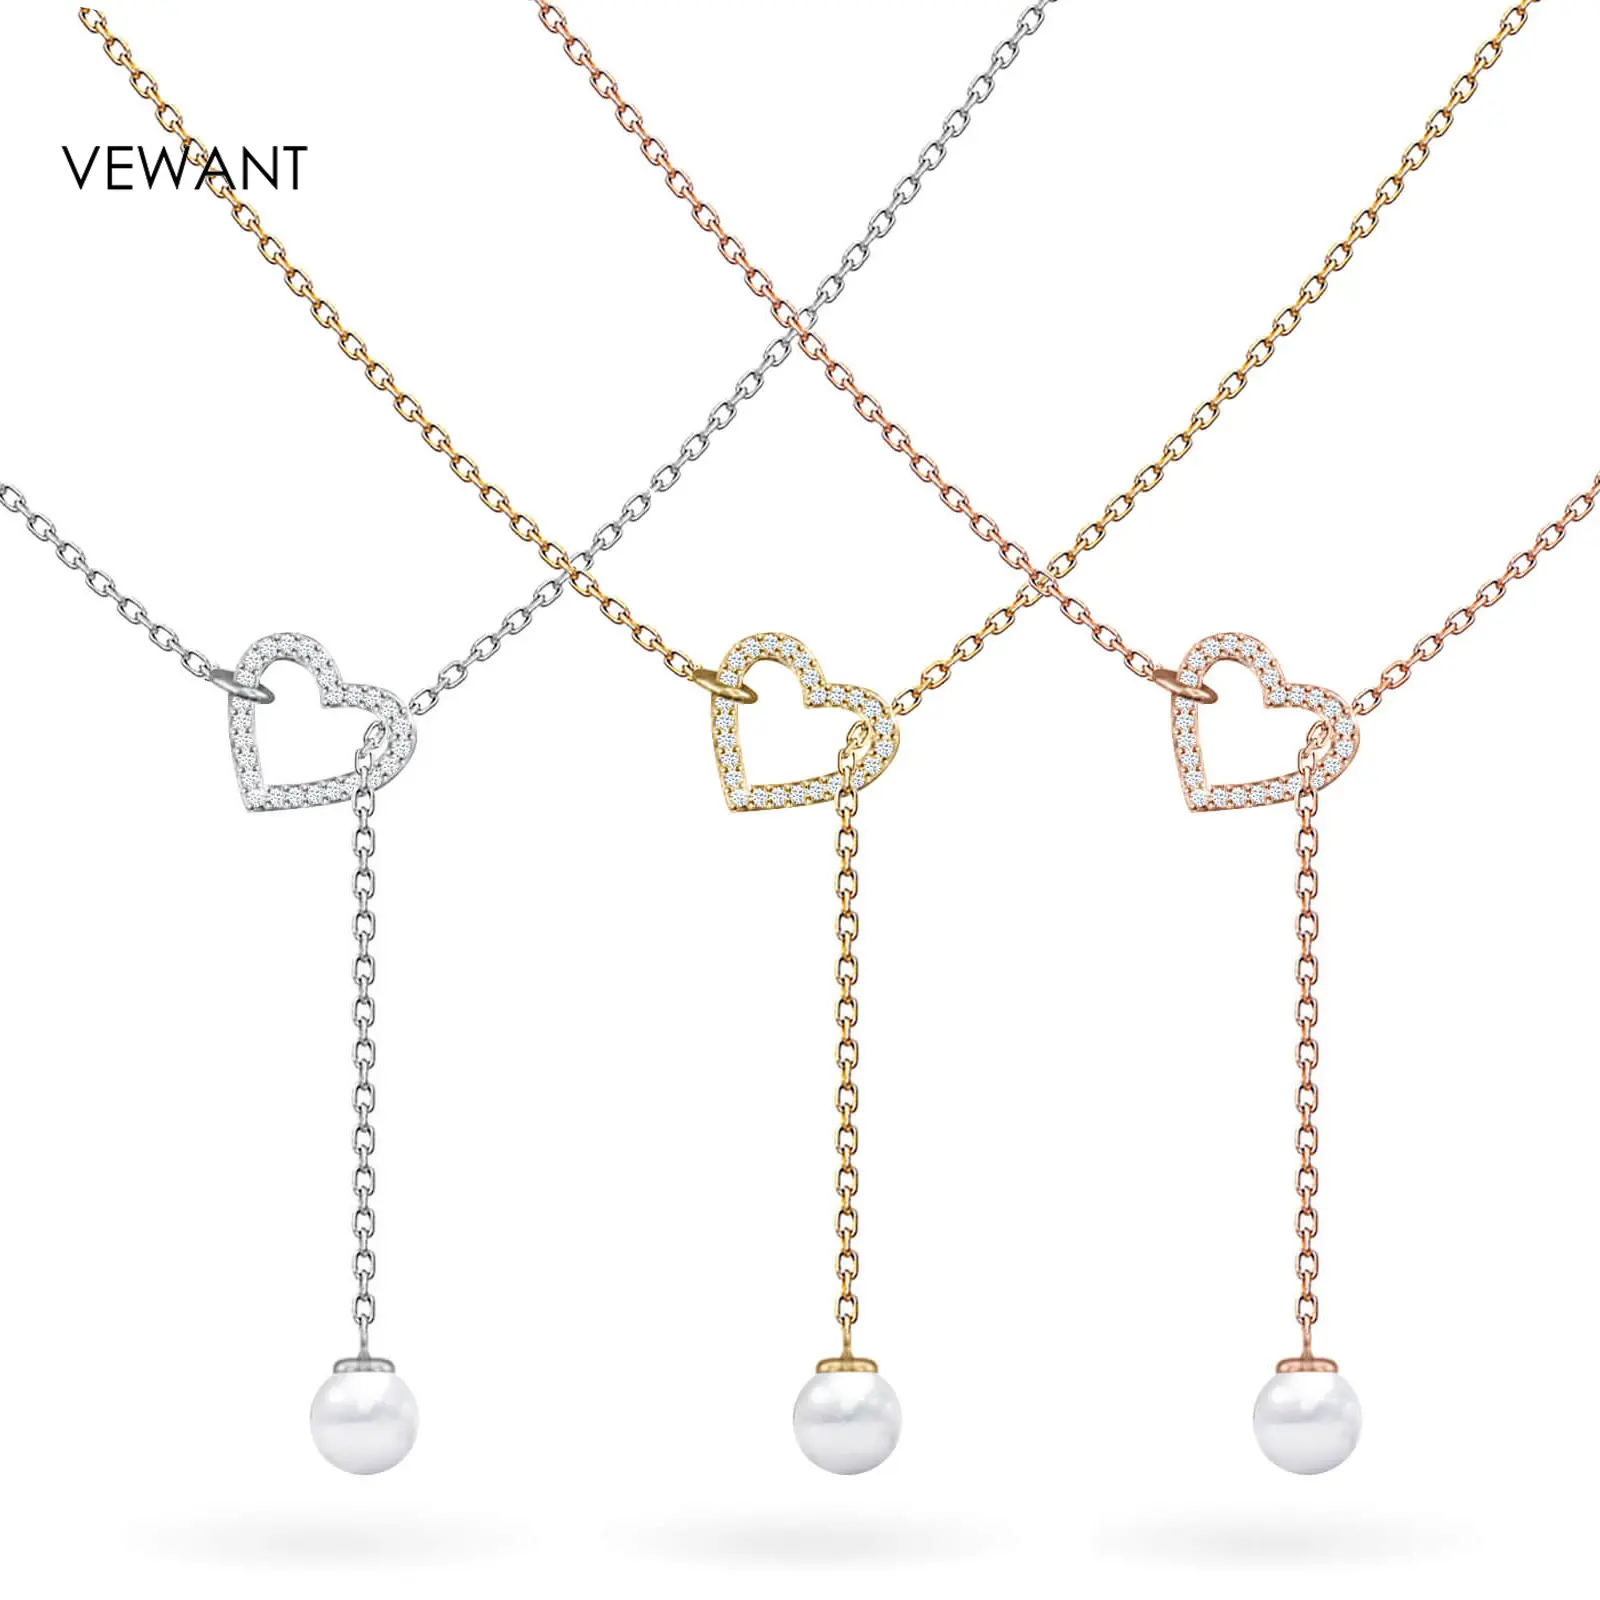 Vewant Fashion 925 Silver 18k Gold Plated Toggle Jewelry Necklaces Minimalist Pearl Drop Heart toggle Necklace